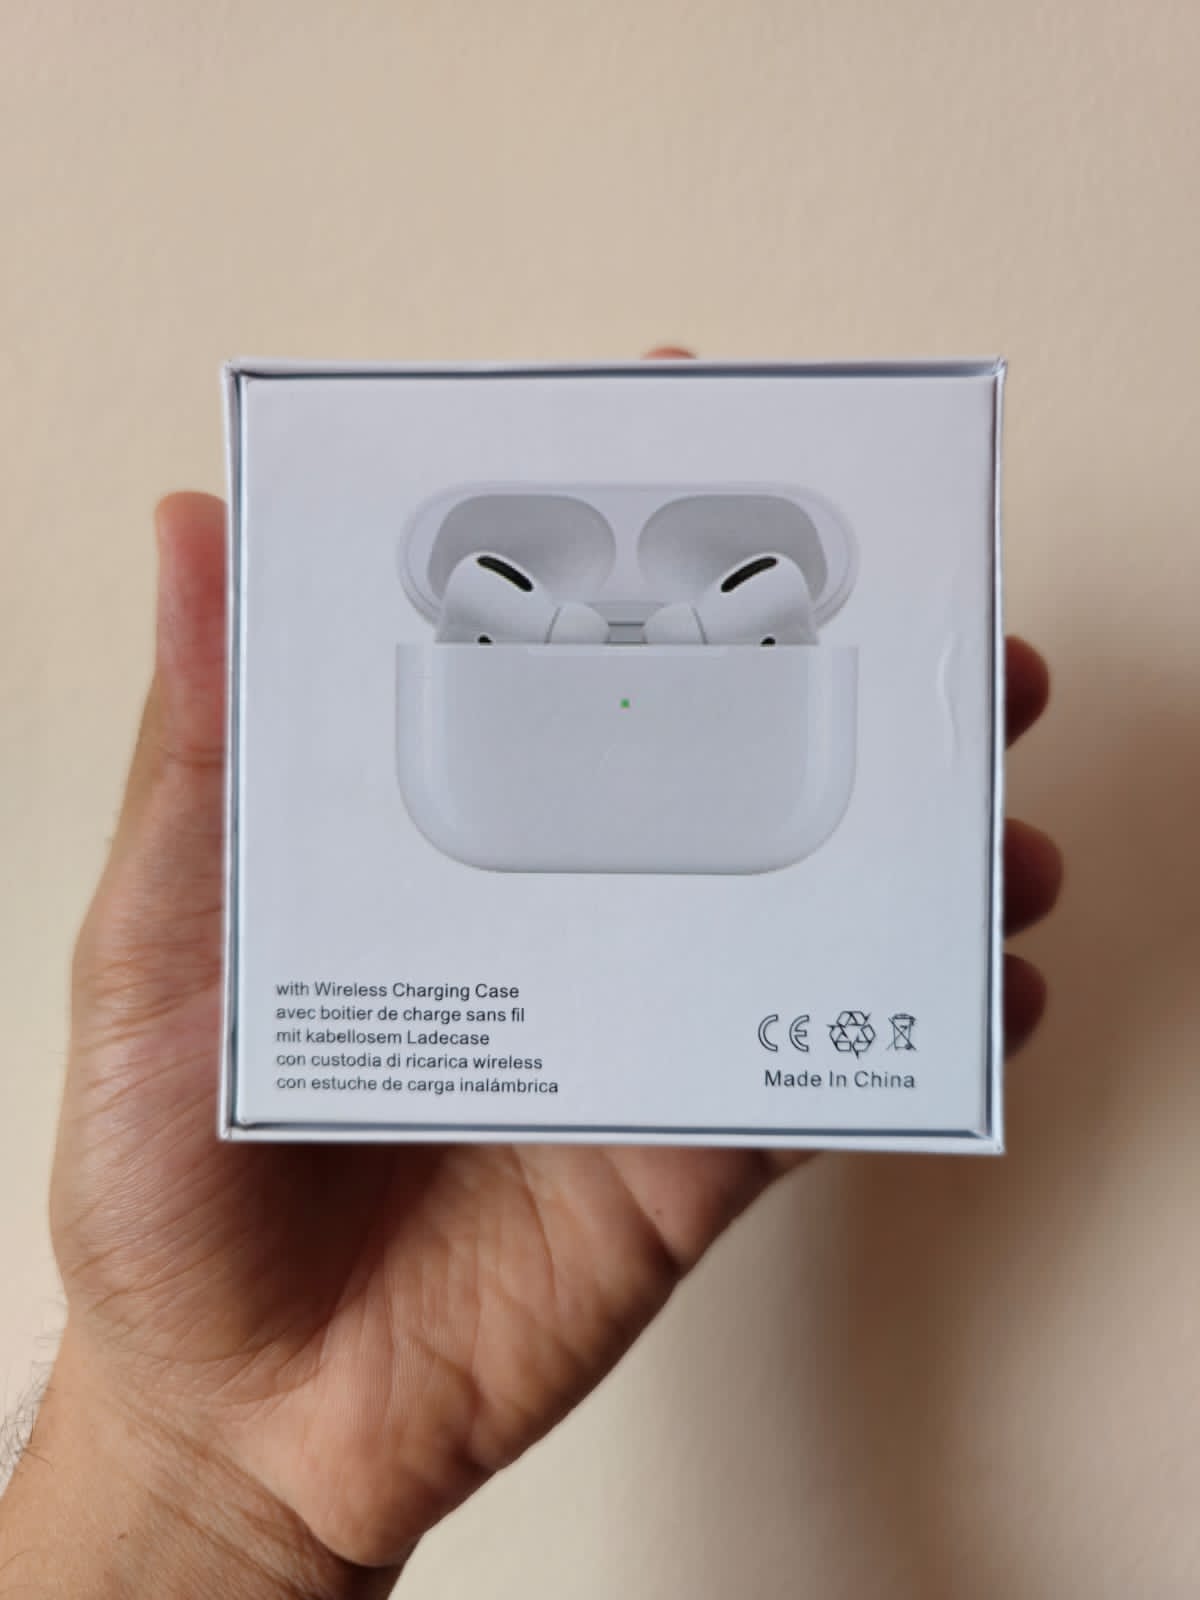 AirPods Pro 1:1 Copy